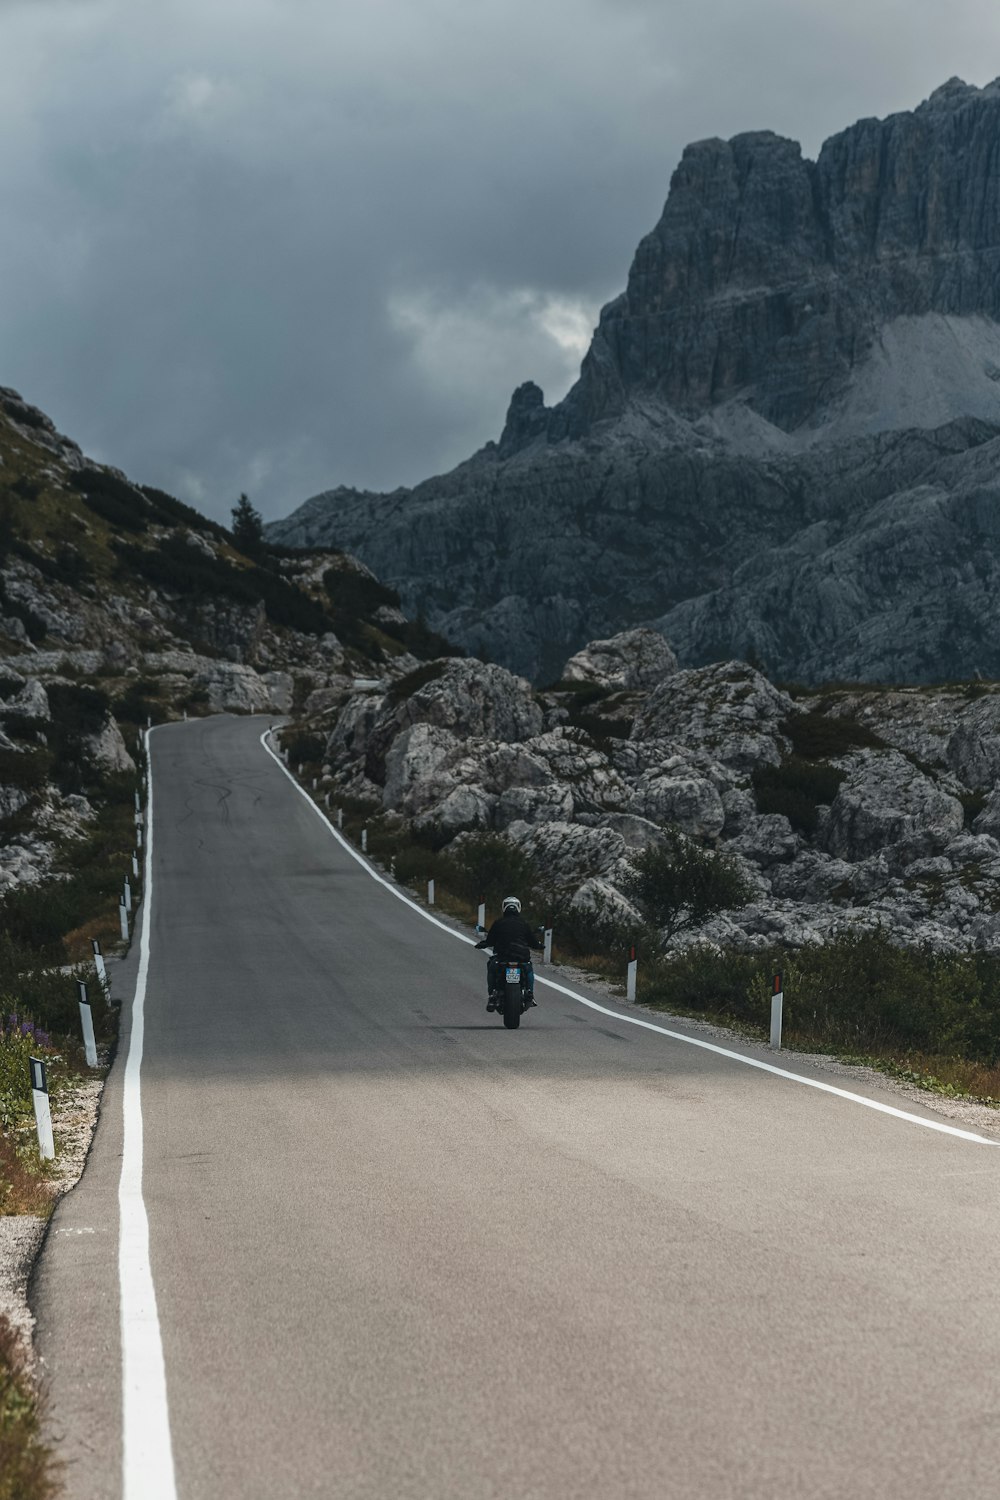 a person riding a motorcycle on a road between mountains